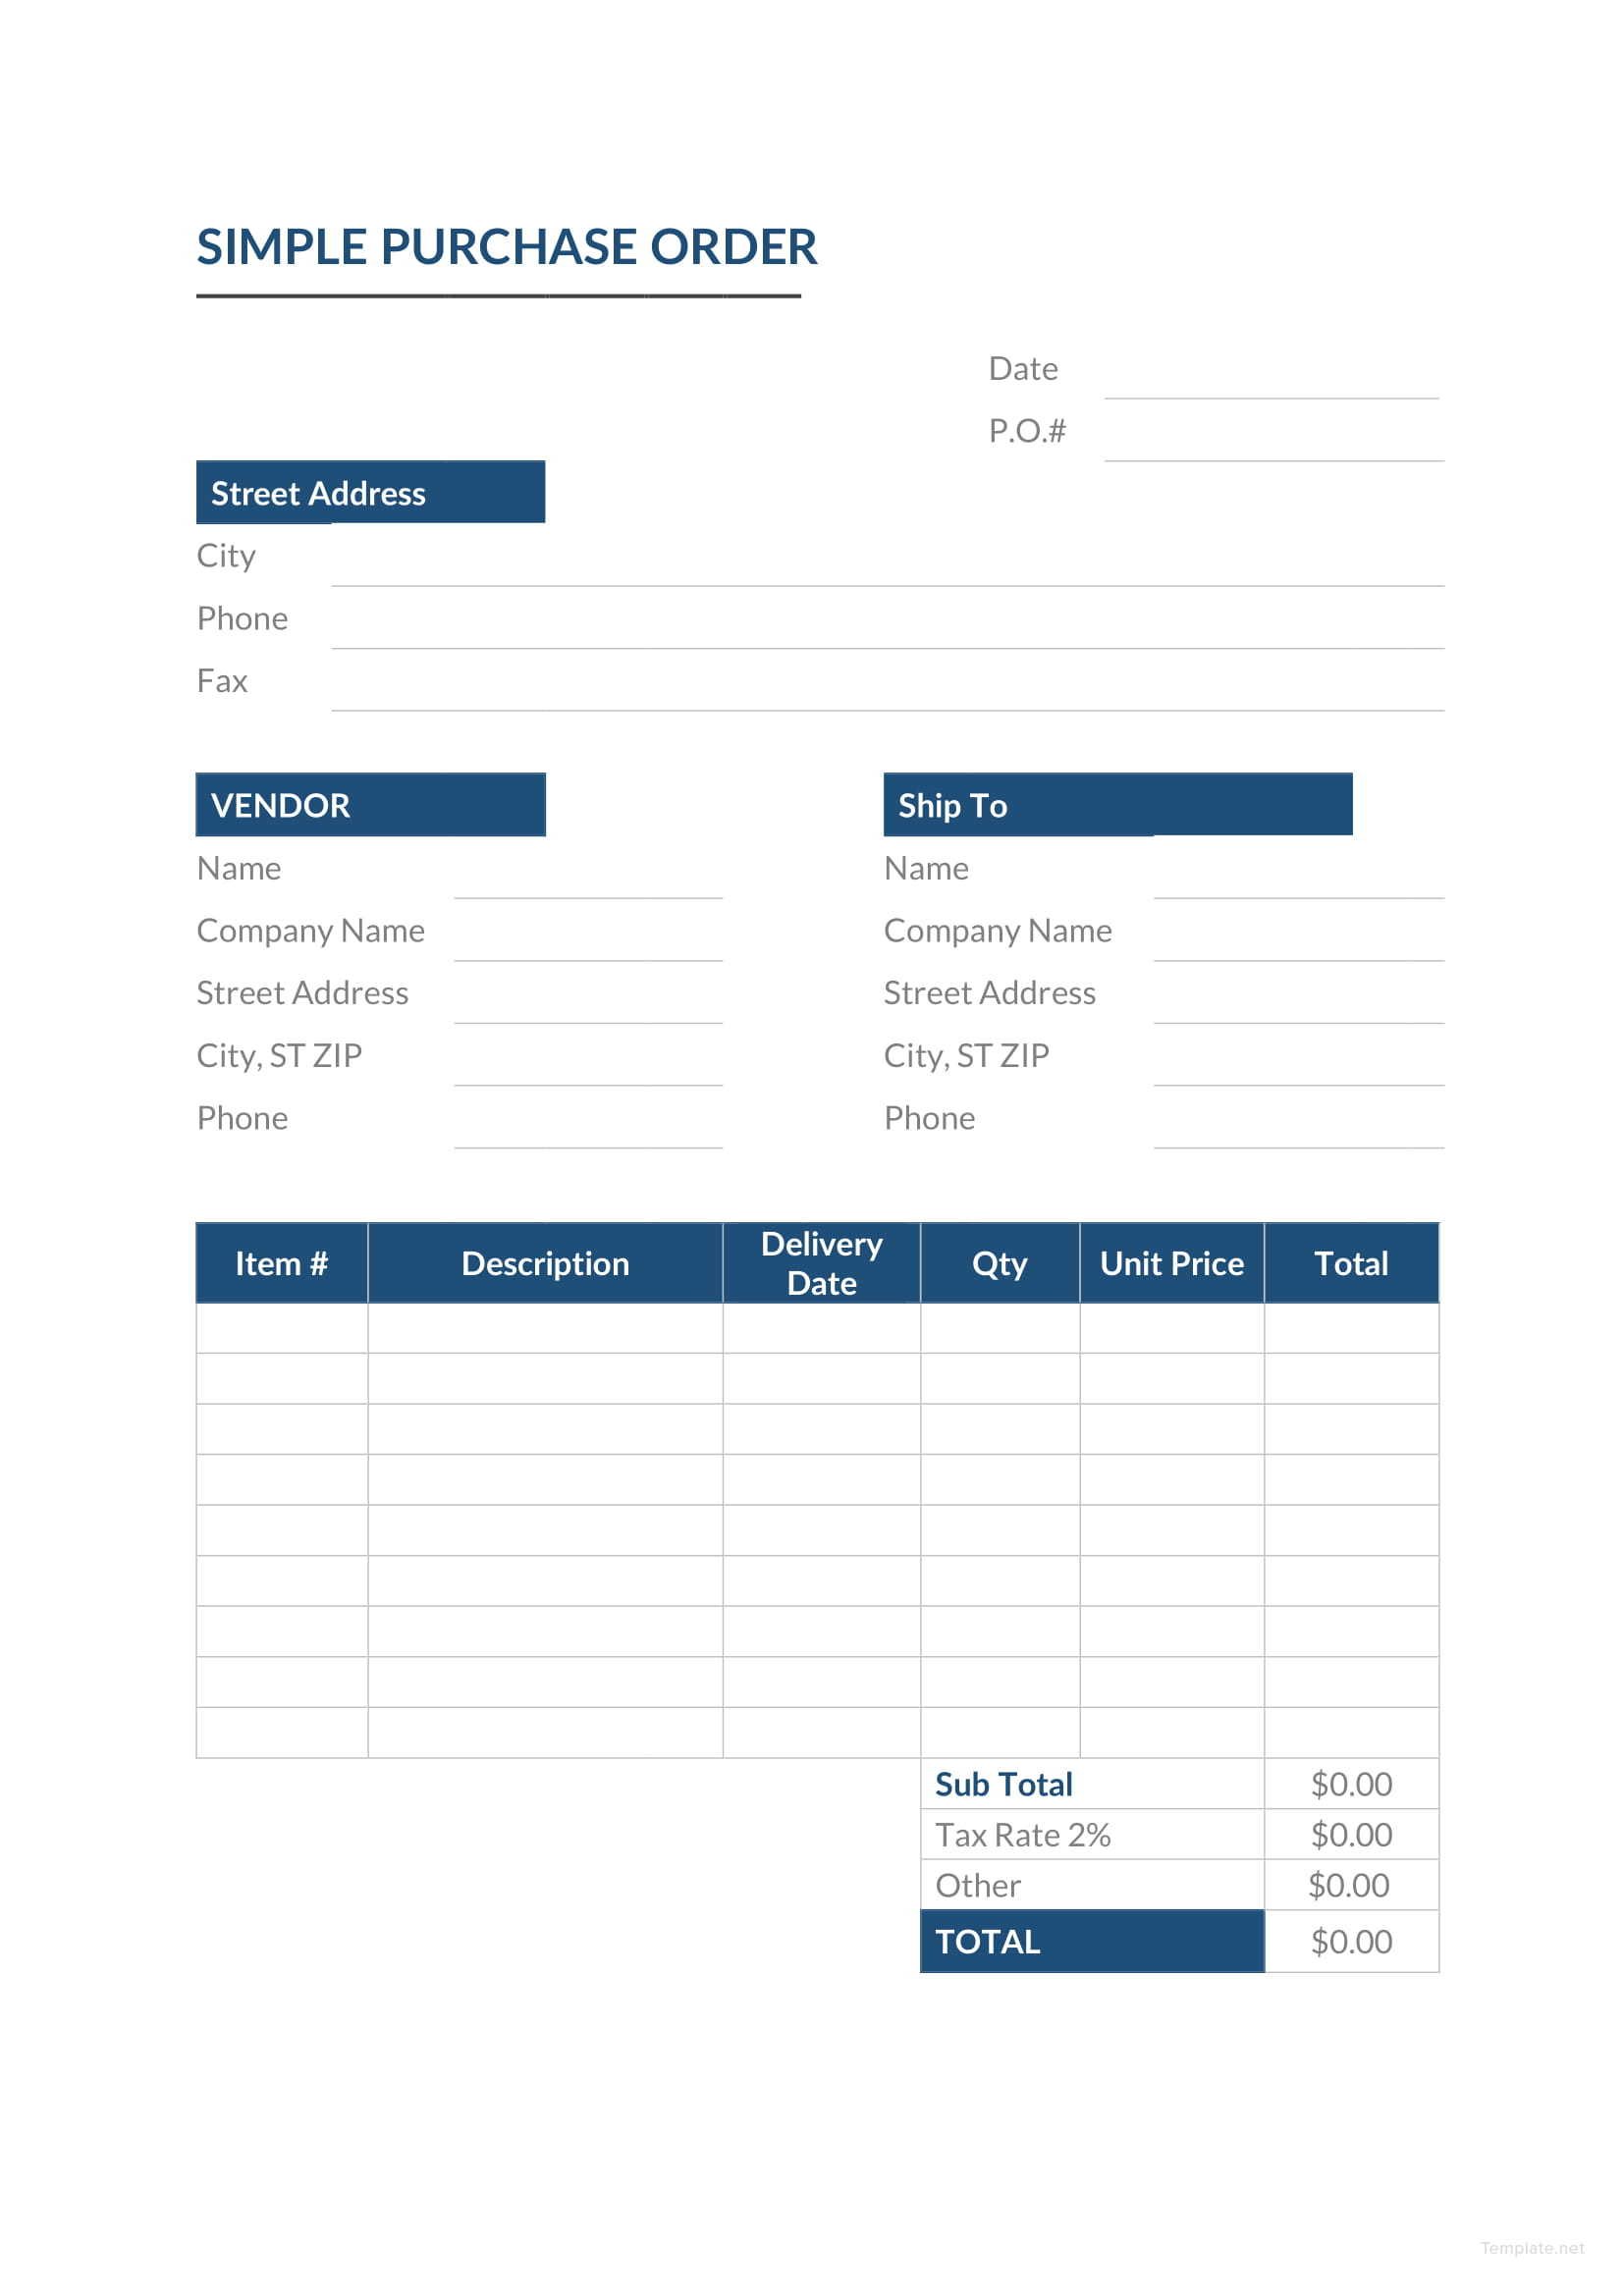 microsoft excel template purchase order